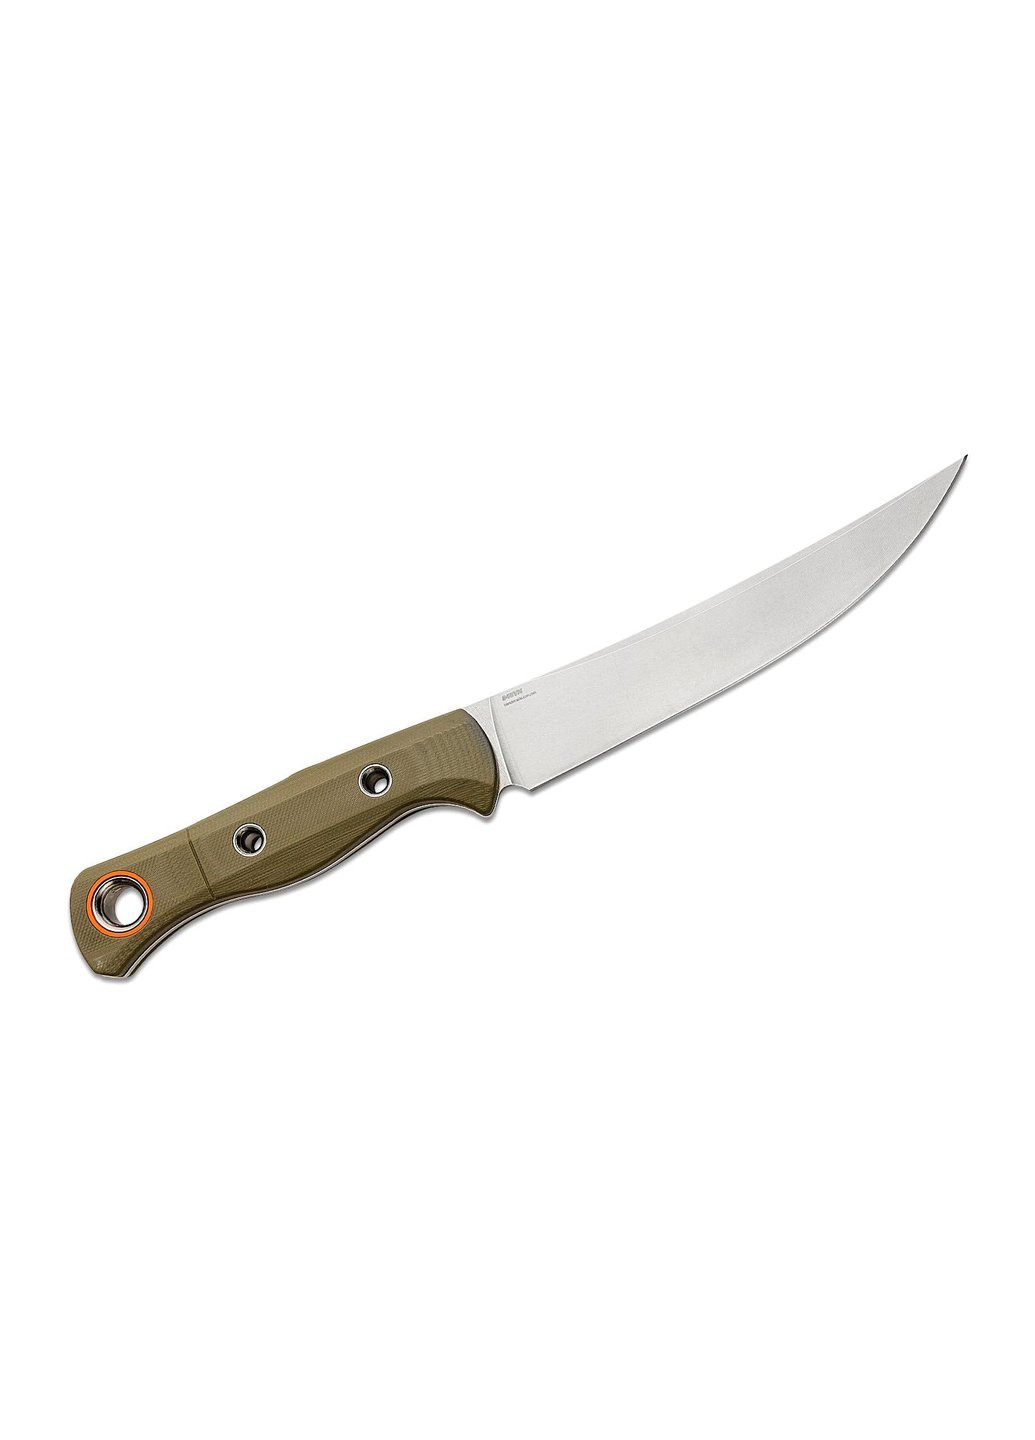 Ніж Meatcrafter Olive G10 (15500-3) Benchmade (257223663)